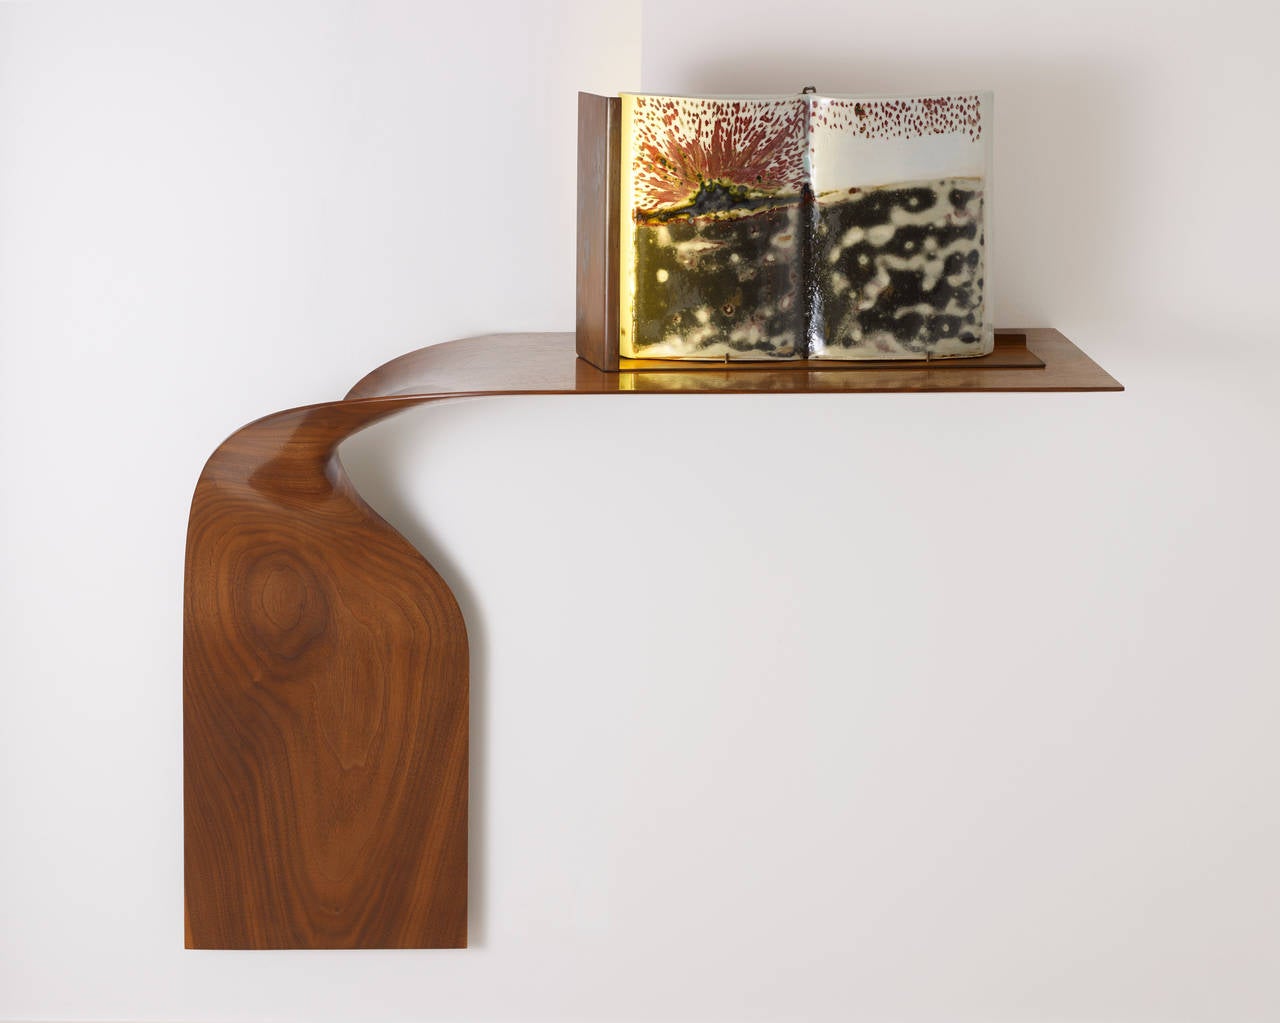 A masterpiece in Minimalist design and craftsmanship, this sculptural hand-carved wall console by Dublin-born and Manhattan-based interior designer Carol Egan lies at the crossroads of past and future. Very pure and simple in style, this wall